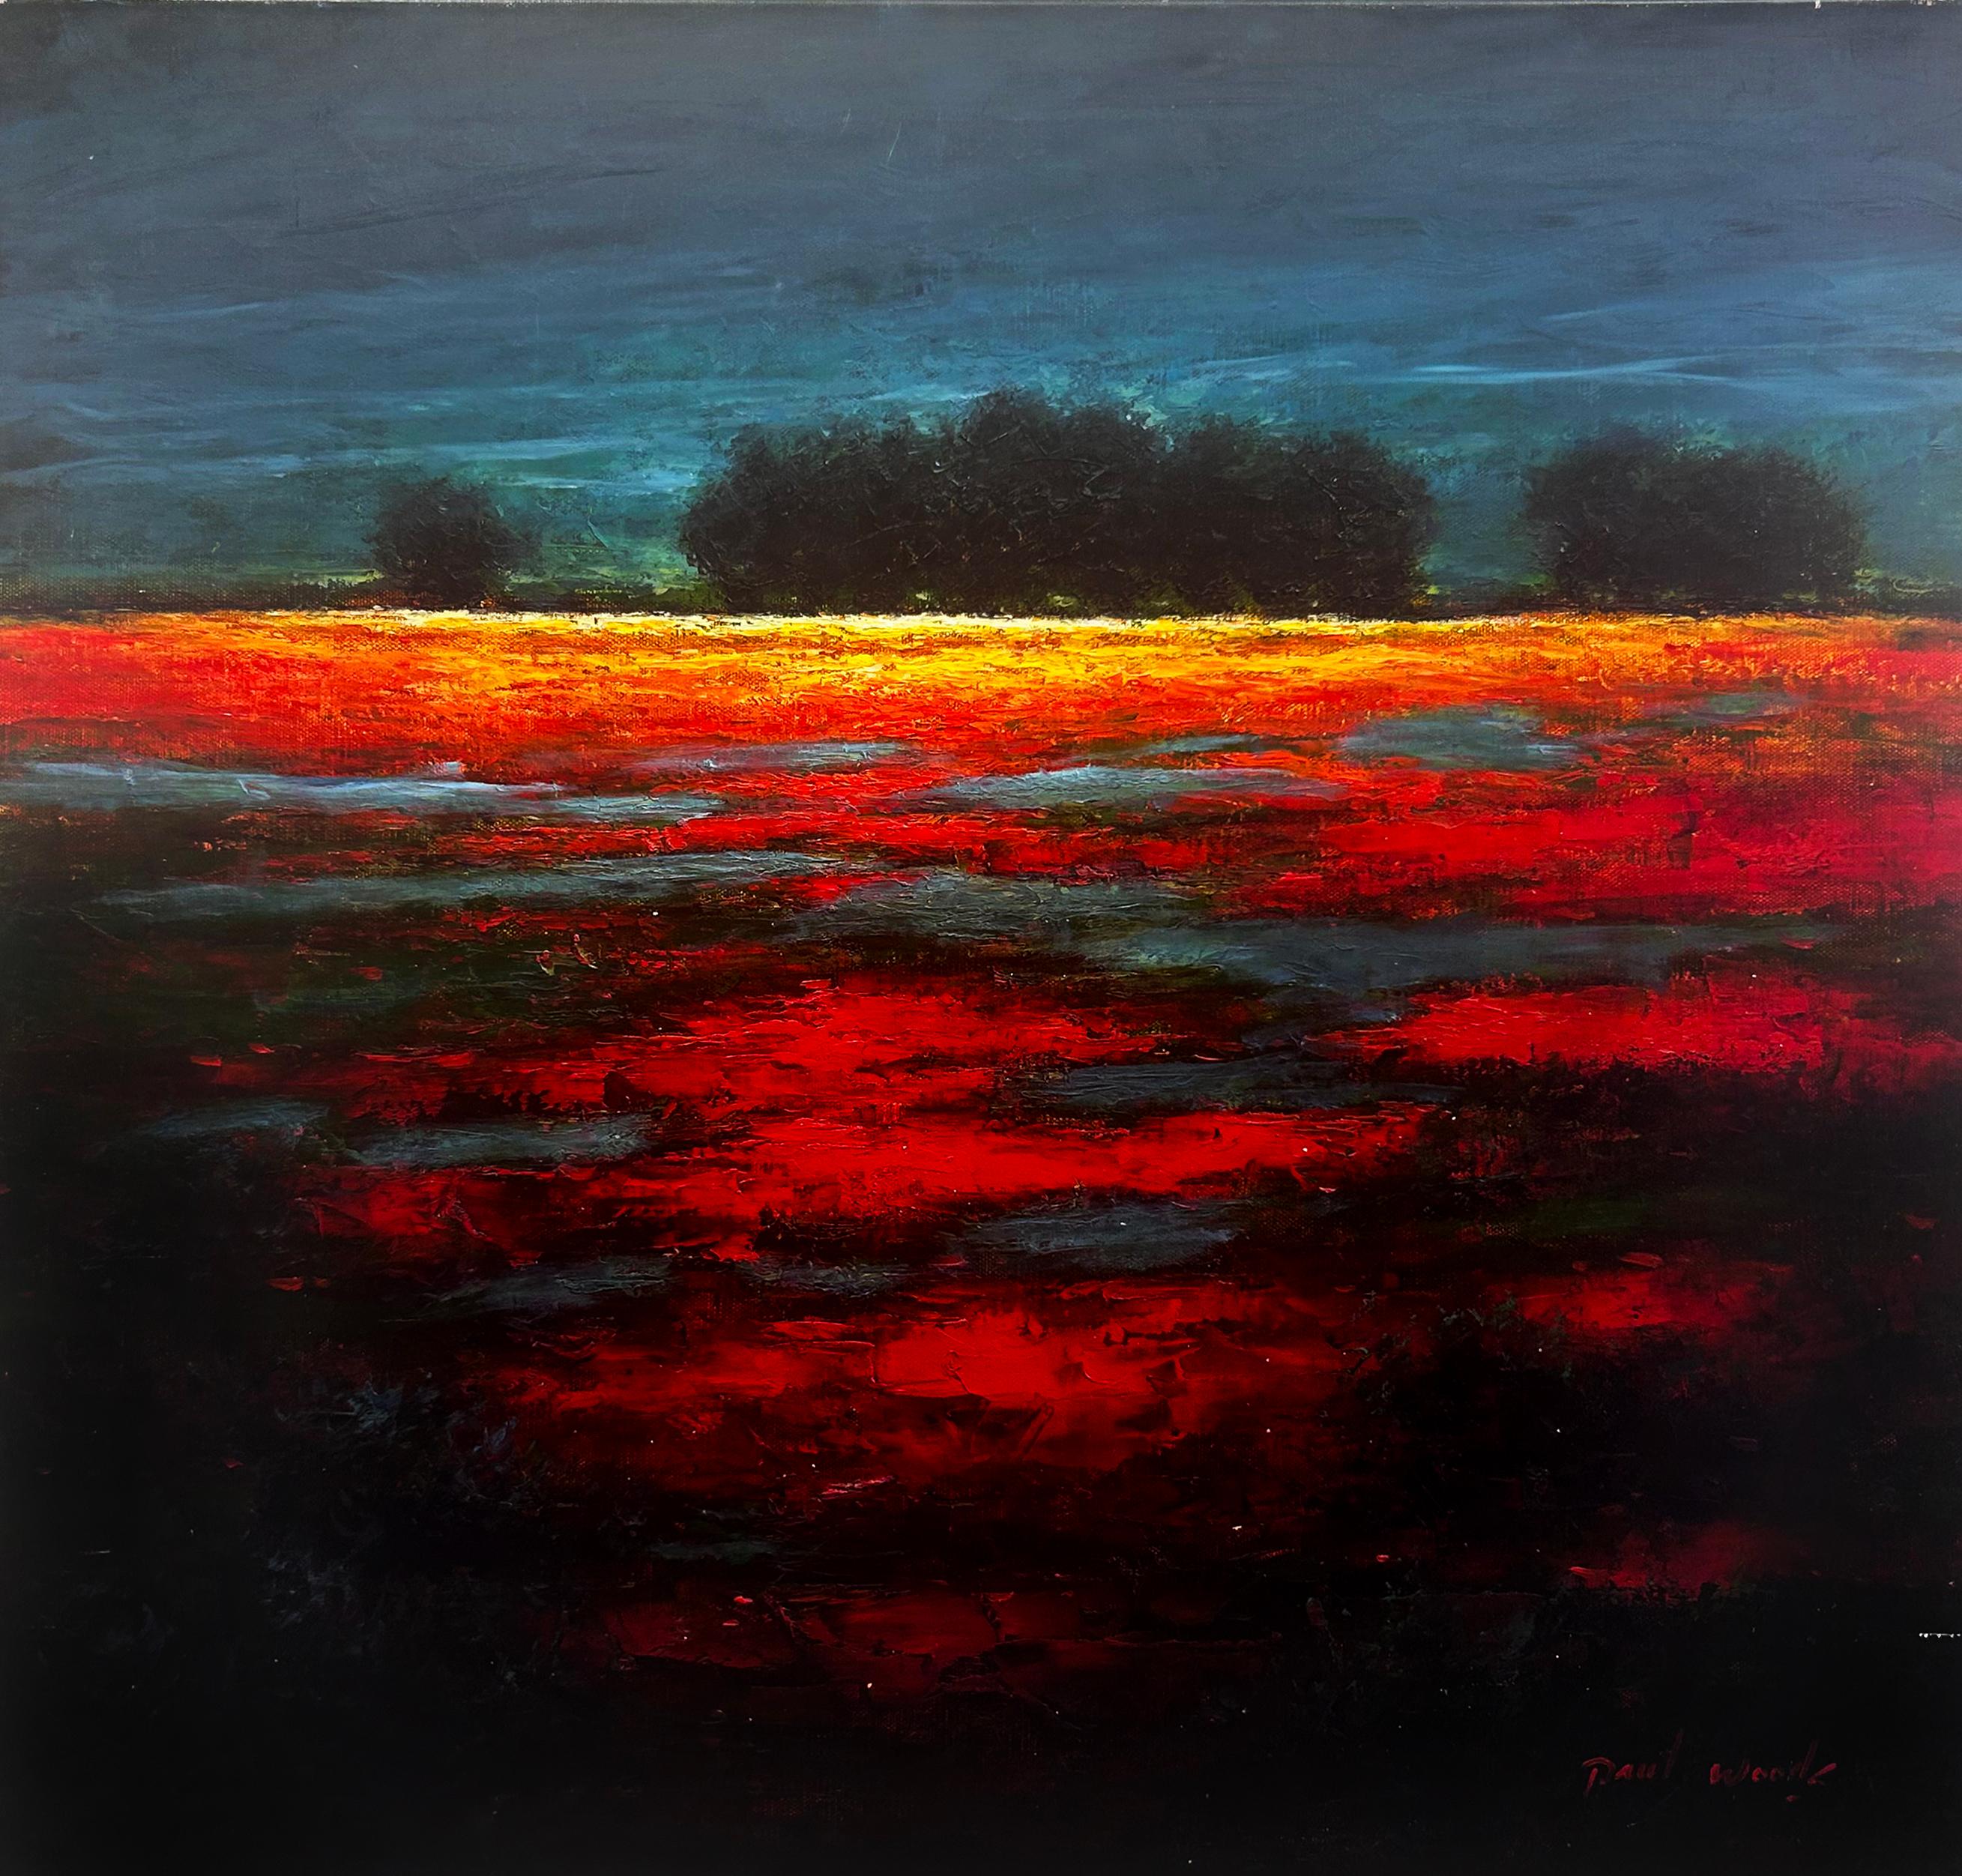 "Garnet Fields" is a 24x24 oil painting on canvas by artist Paul Woods. Featured is a dark moody high contrast abstracted landscape. Dark silhouetted trees line the high horizon illuminated by true deep blues of the night sky. Lingering red and